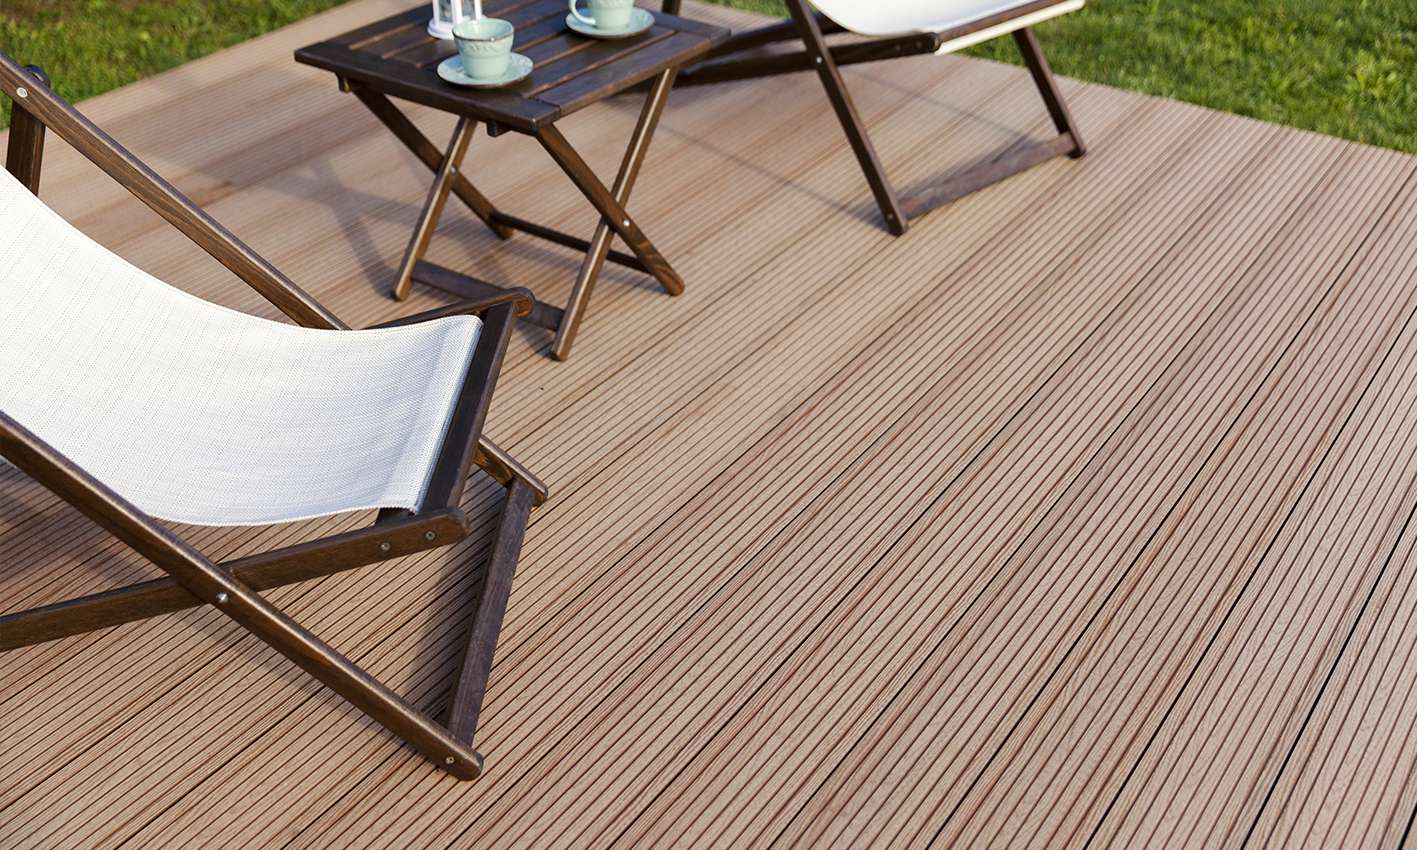 Composite Decking vs Real Wood: Which is Better